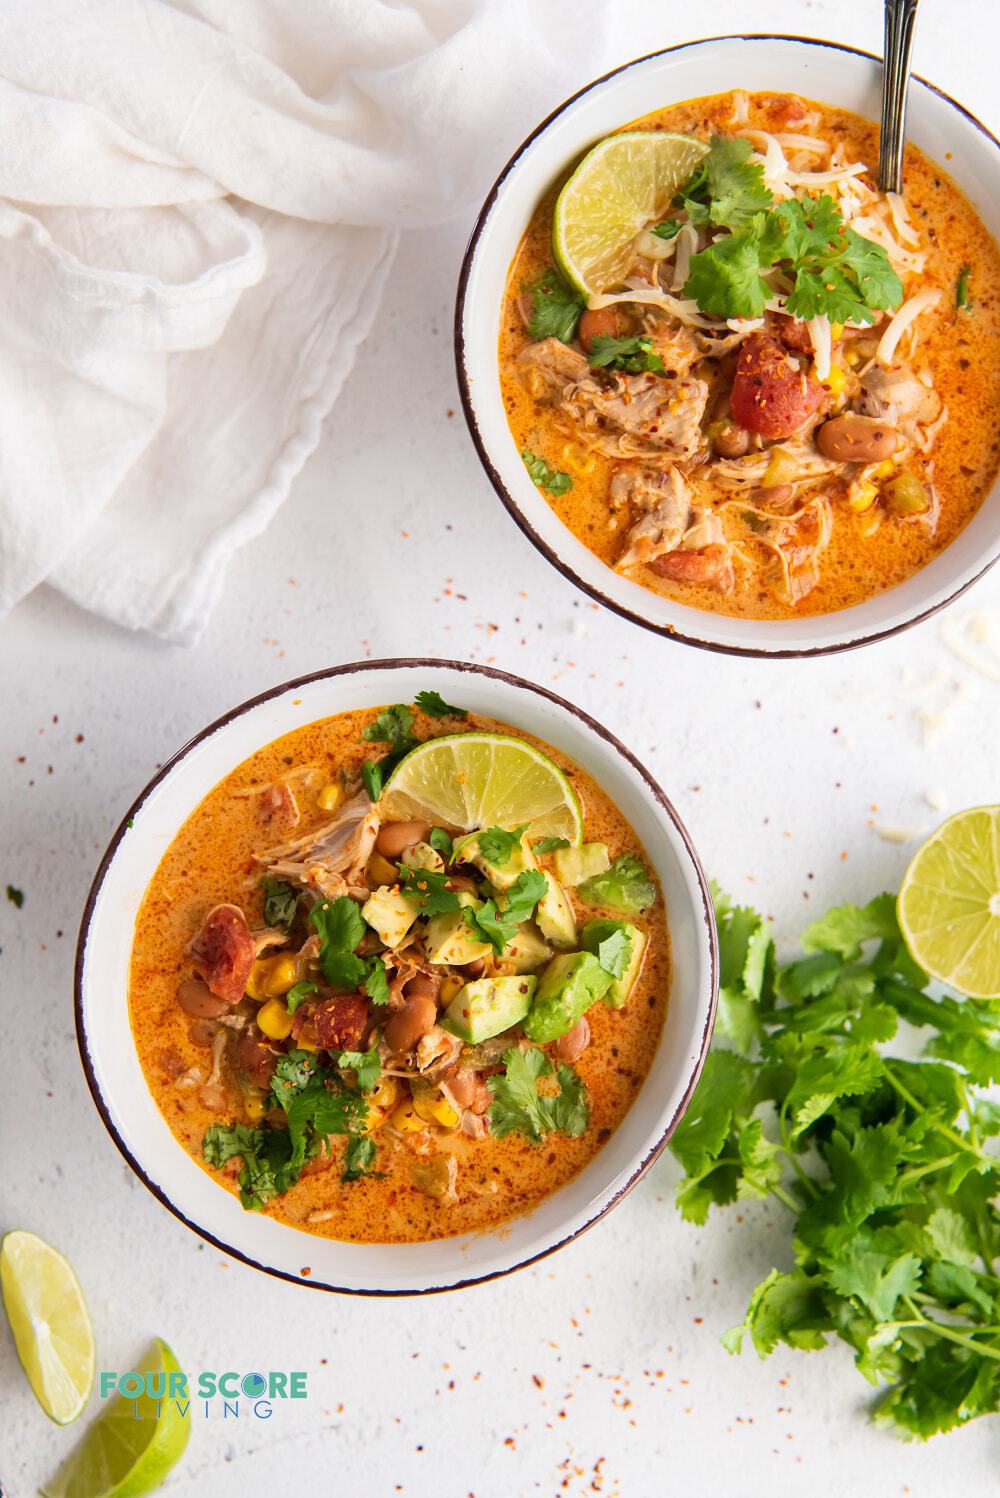 Two bowls of white chicken chili with lime, and cilantro garnishes, viewed from above